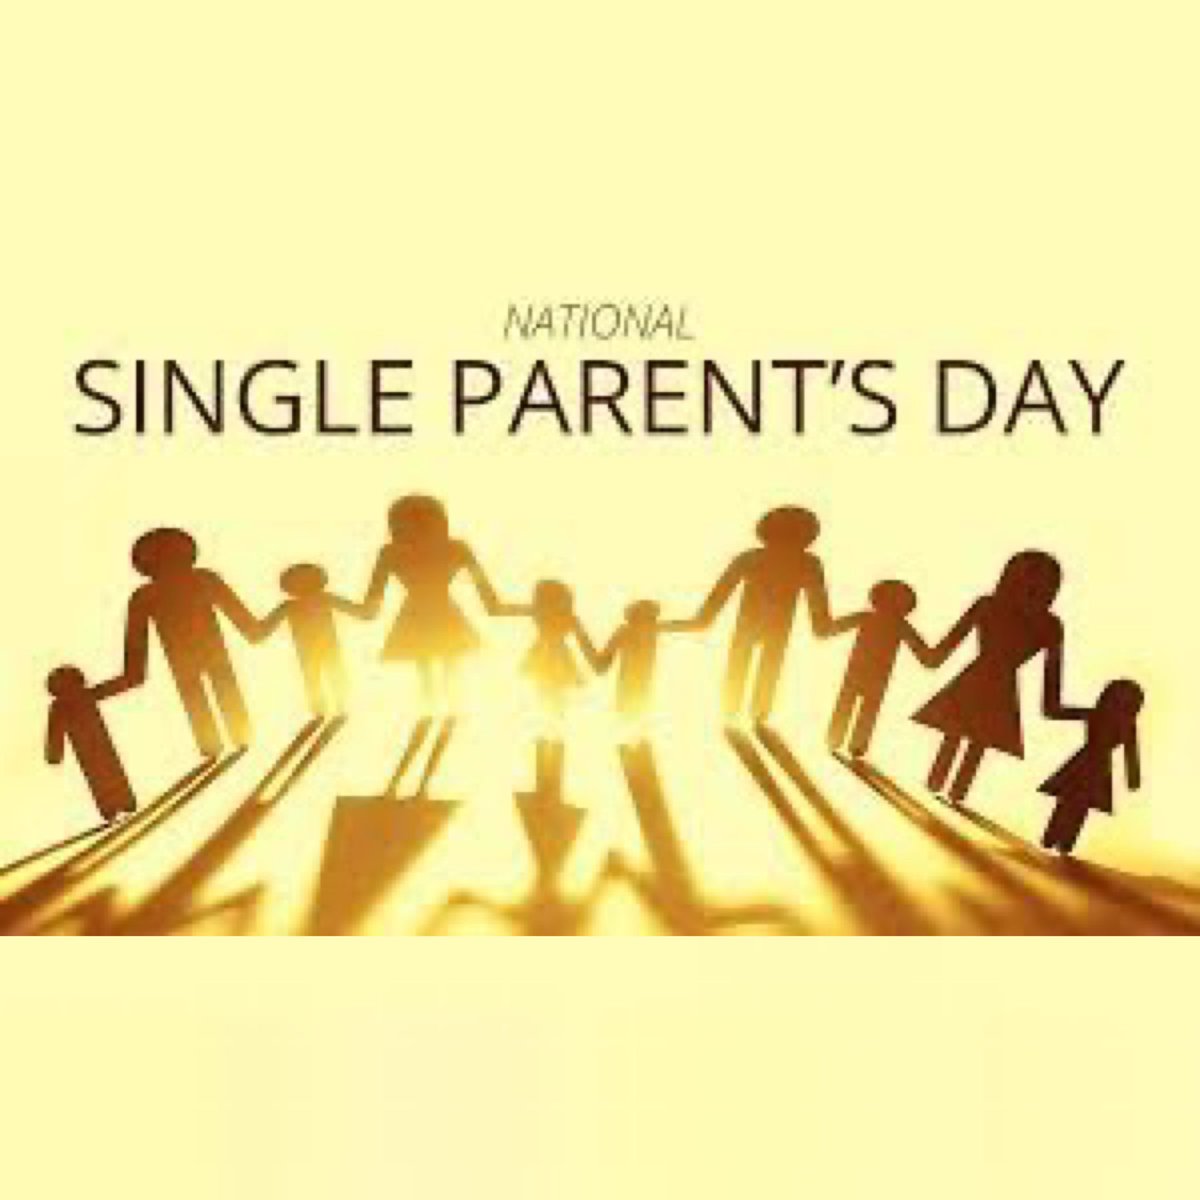 Happy National Single Parents Day, a day to celebrate and honor all the single mothers and fathers across the world for all that they do!!
#NationalSingleParentDay #SingleParentDay